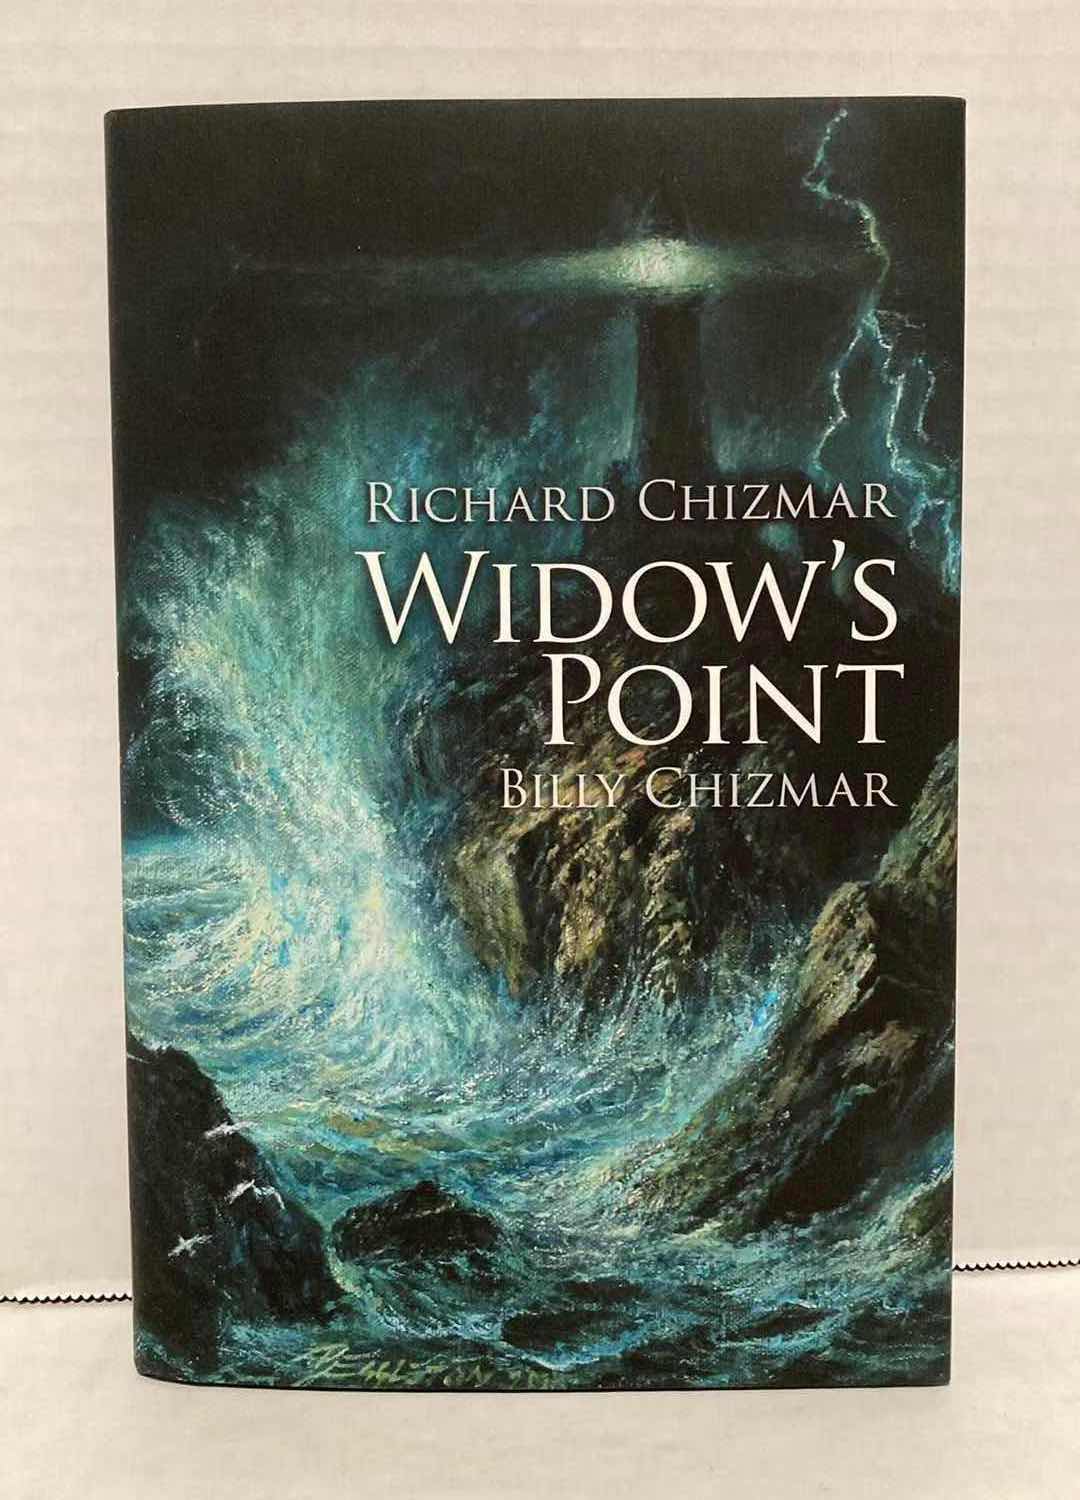 Photo 1 of RICHARD CHIZMAR & BILLY CHIZMAR - WIDOW’S POINT BOOK SIGNED BY RICHARD CHIZMAR